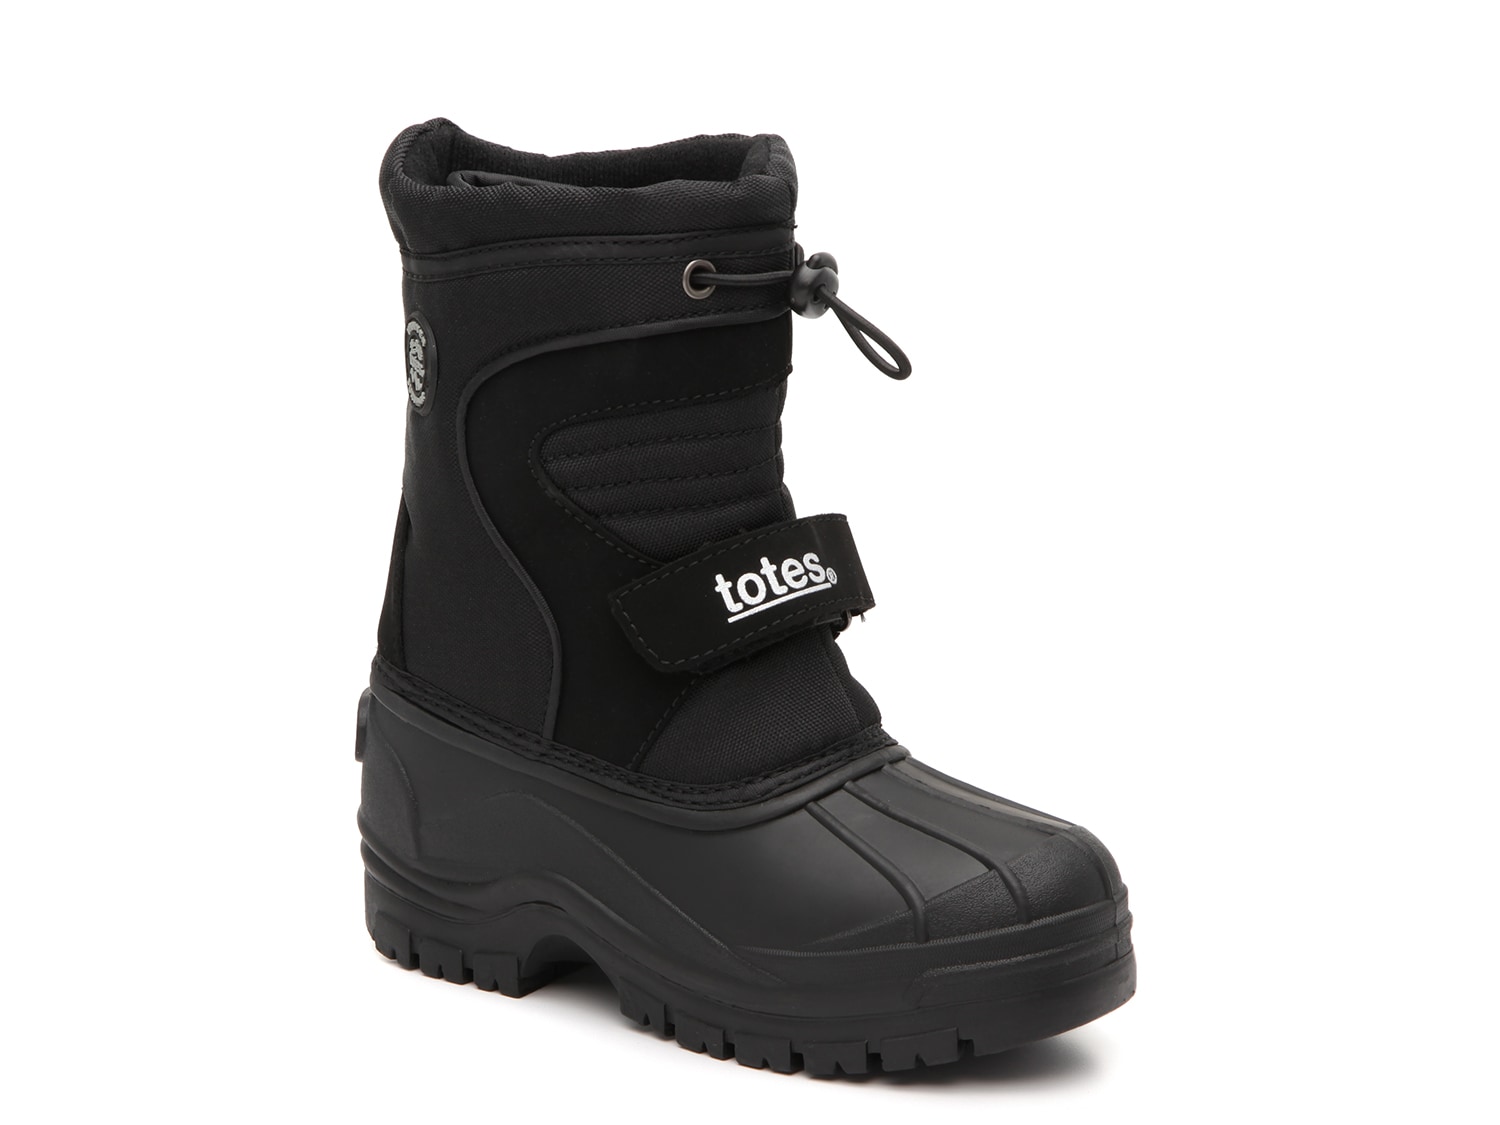 totes childrens snow boots